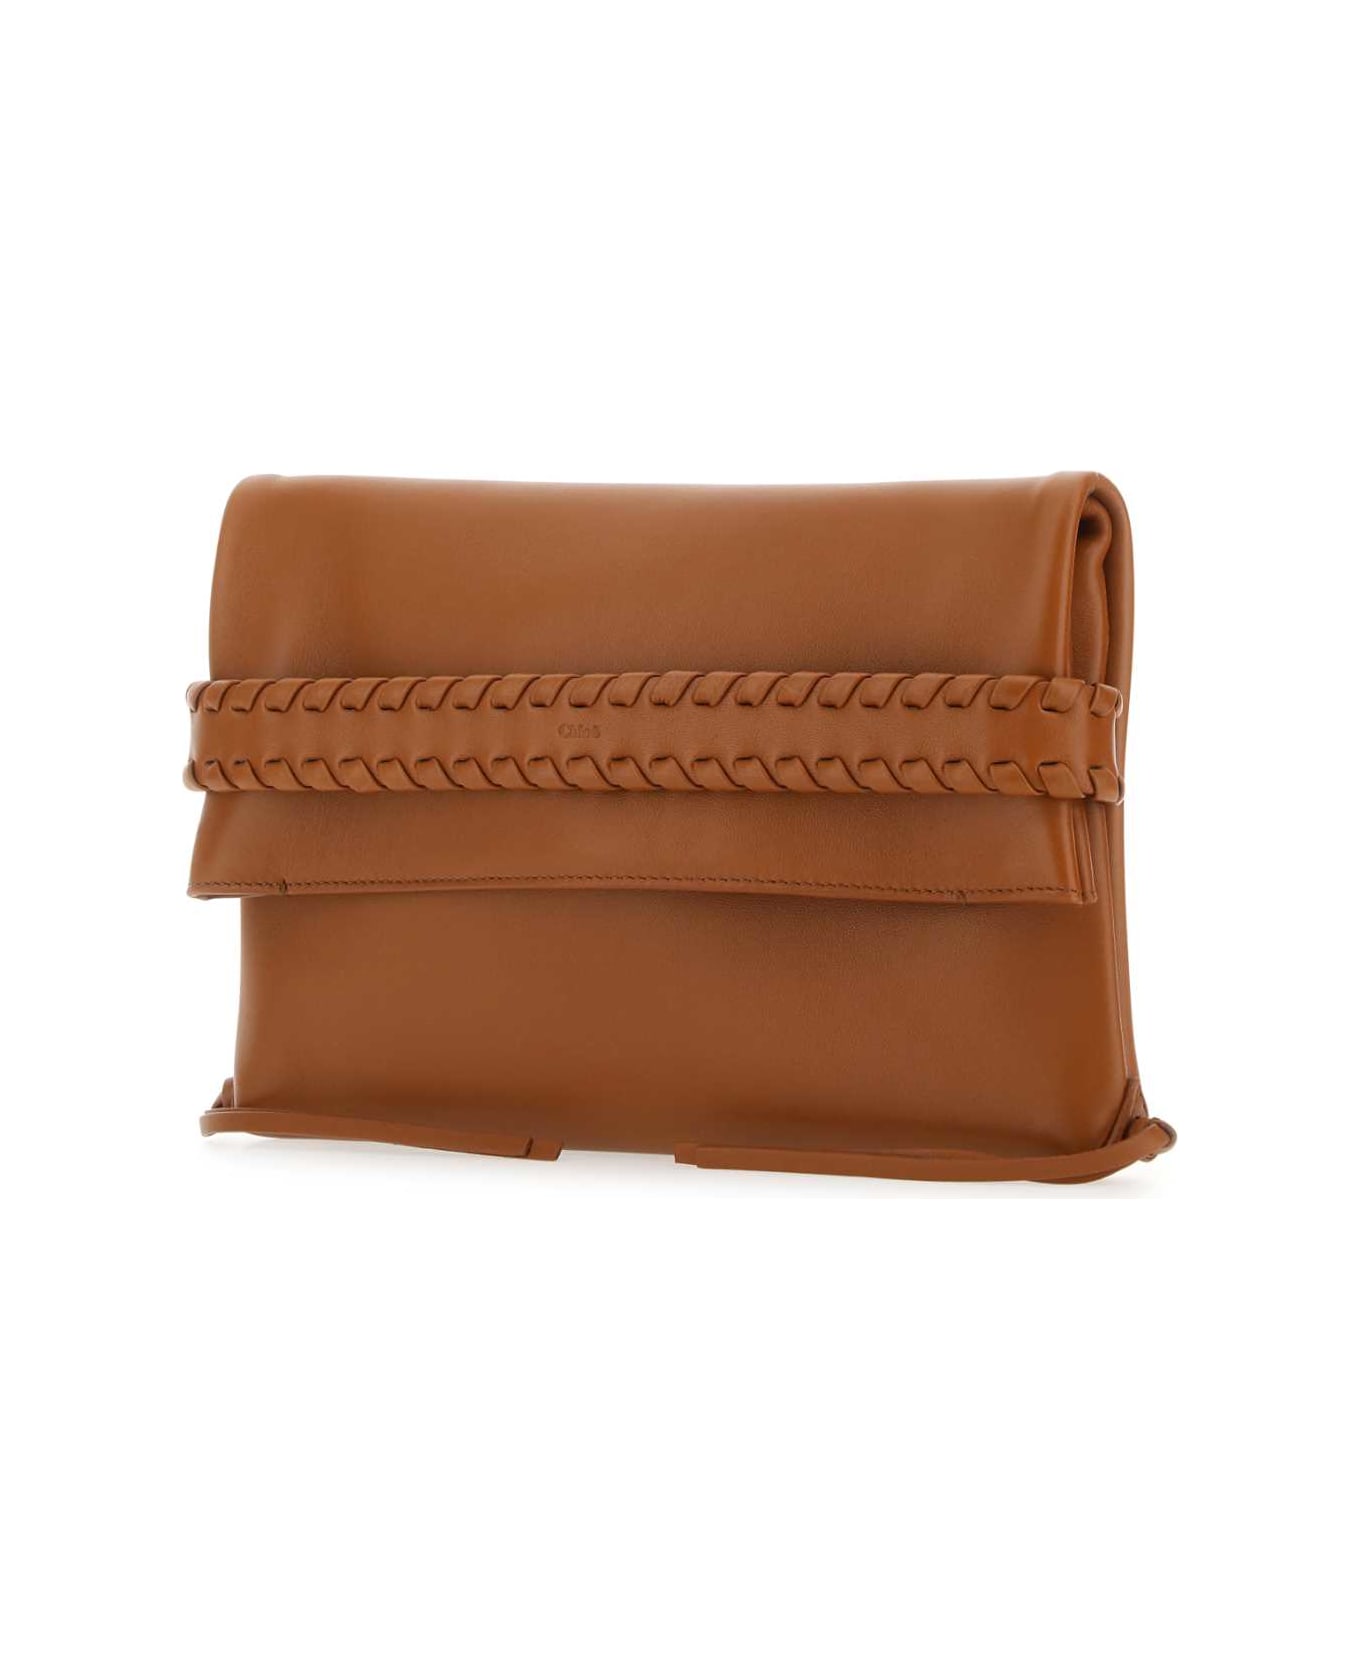 Chloé Caramel Leather Mony Clutch - 247 クラッチバッグ